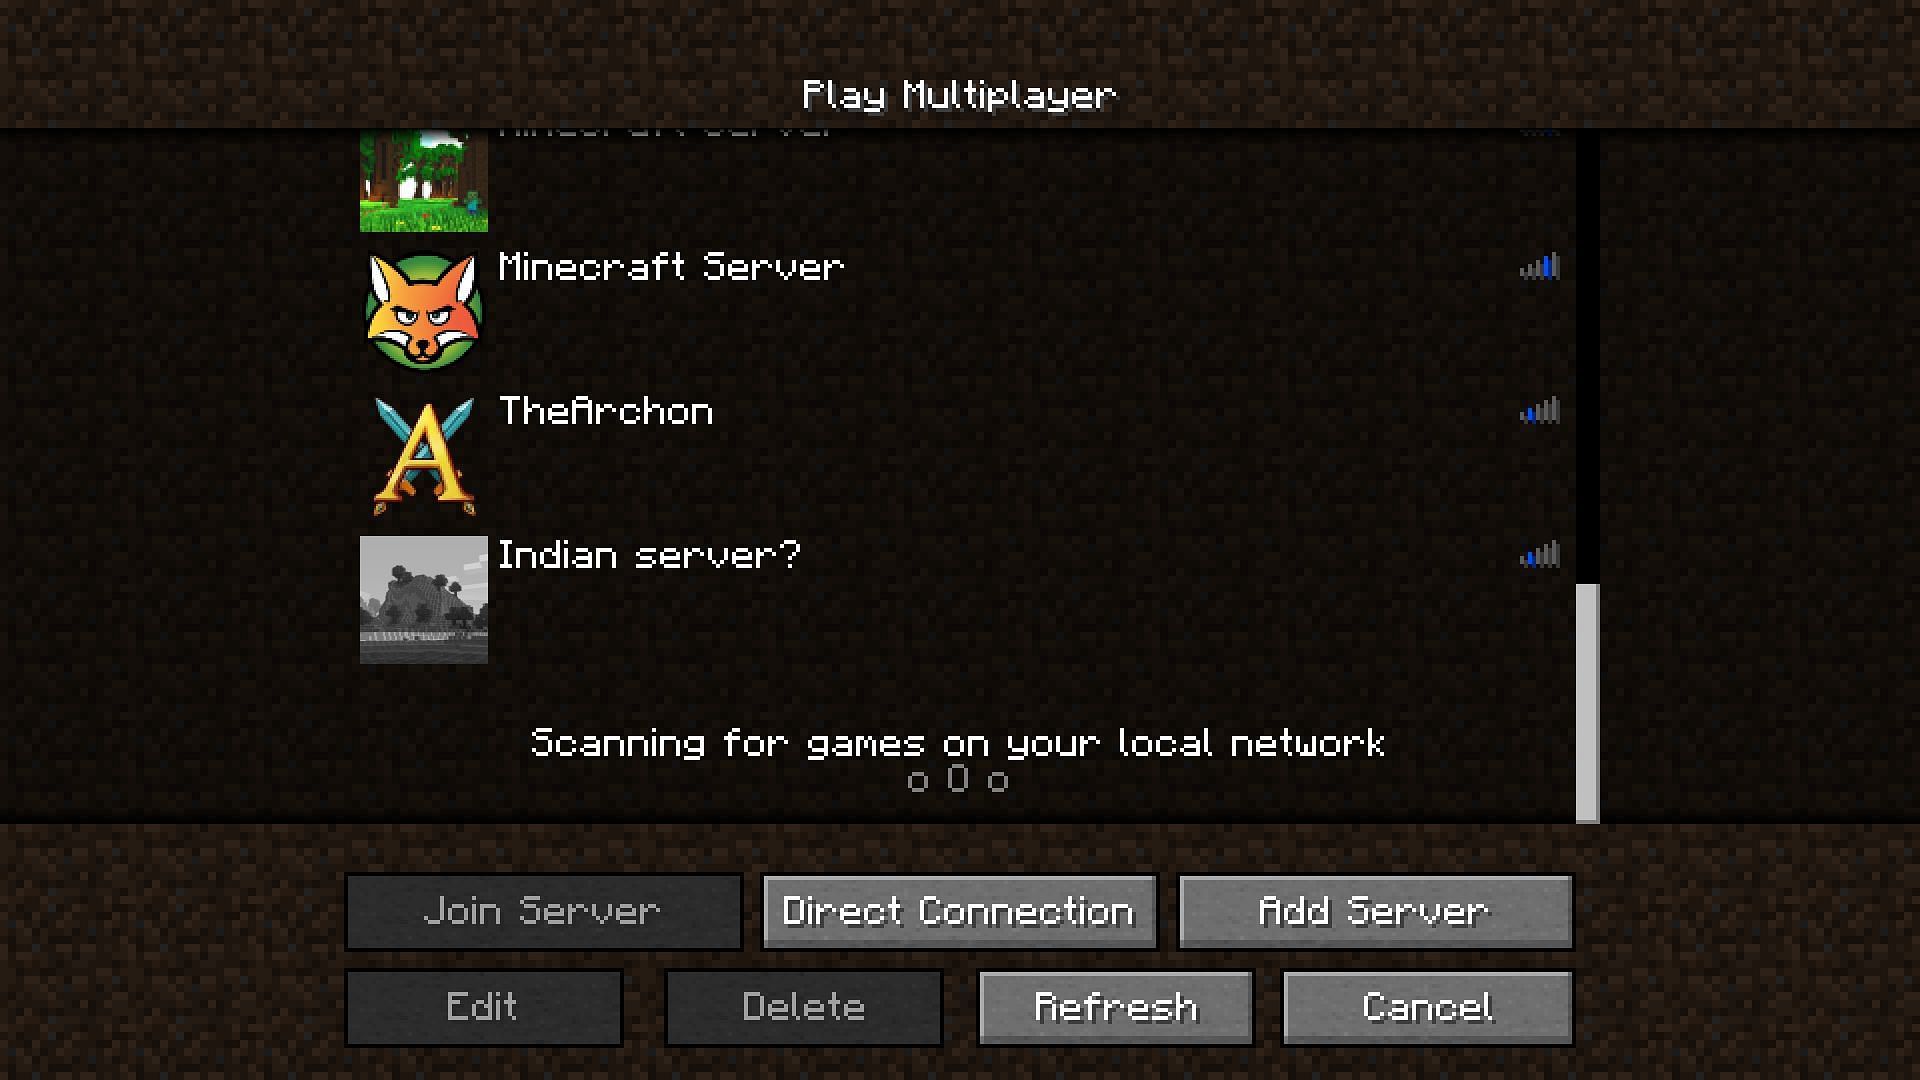 How To Join A Lan World In Minecraft 22